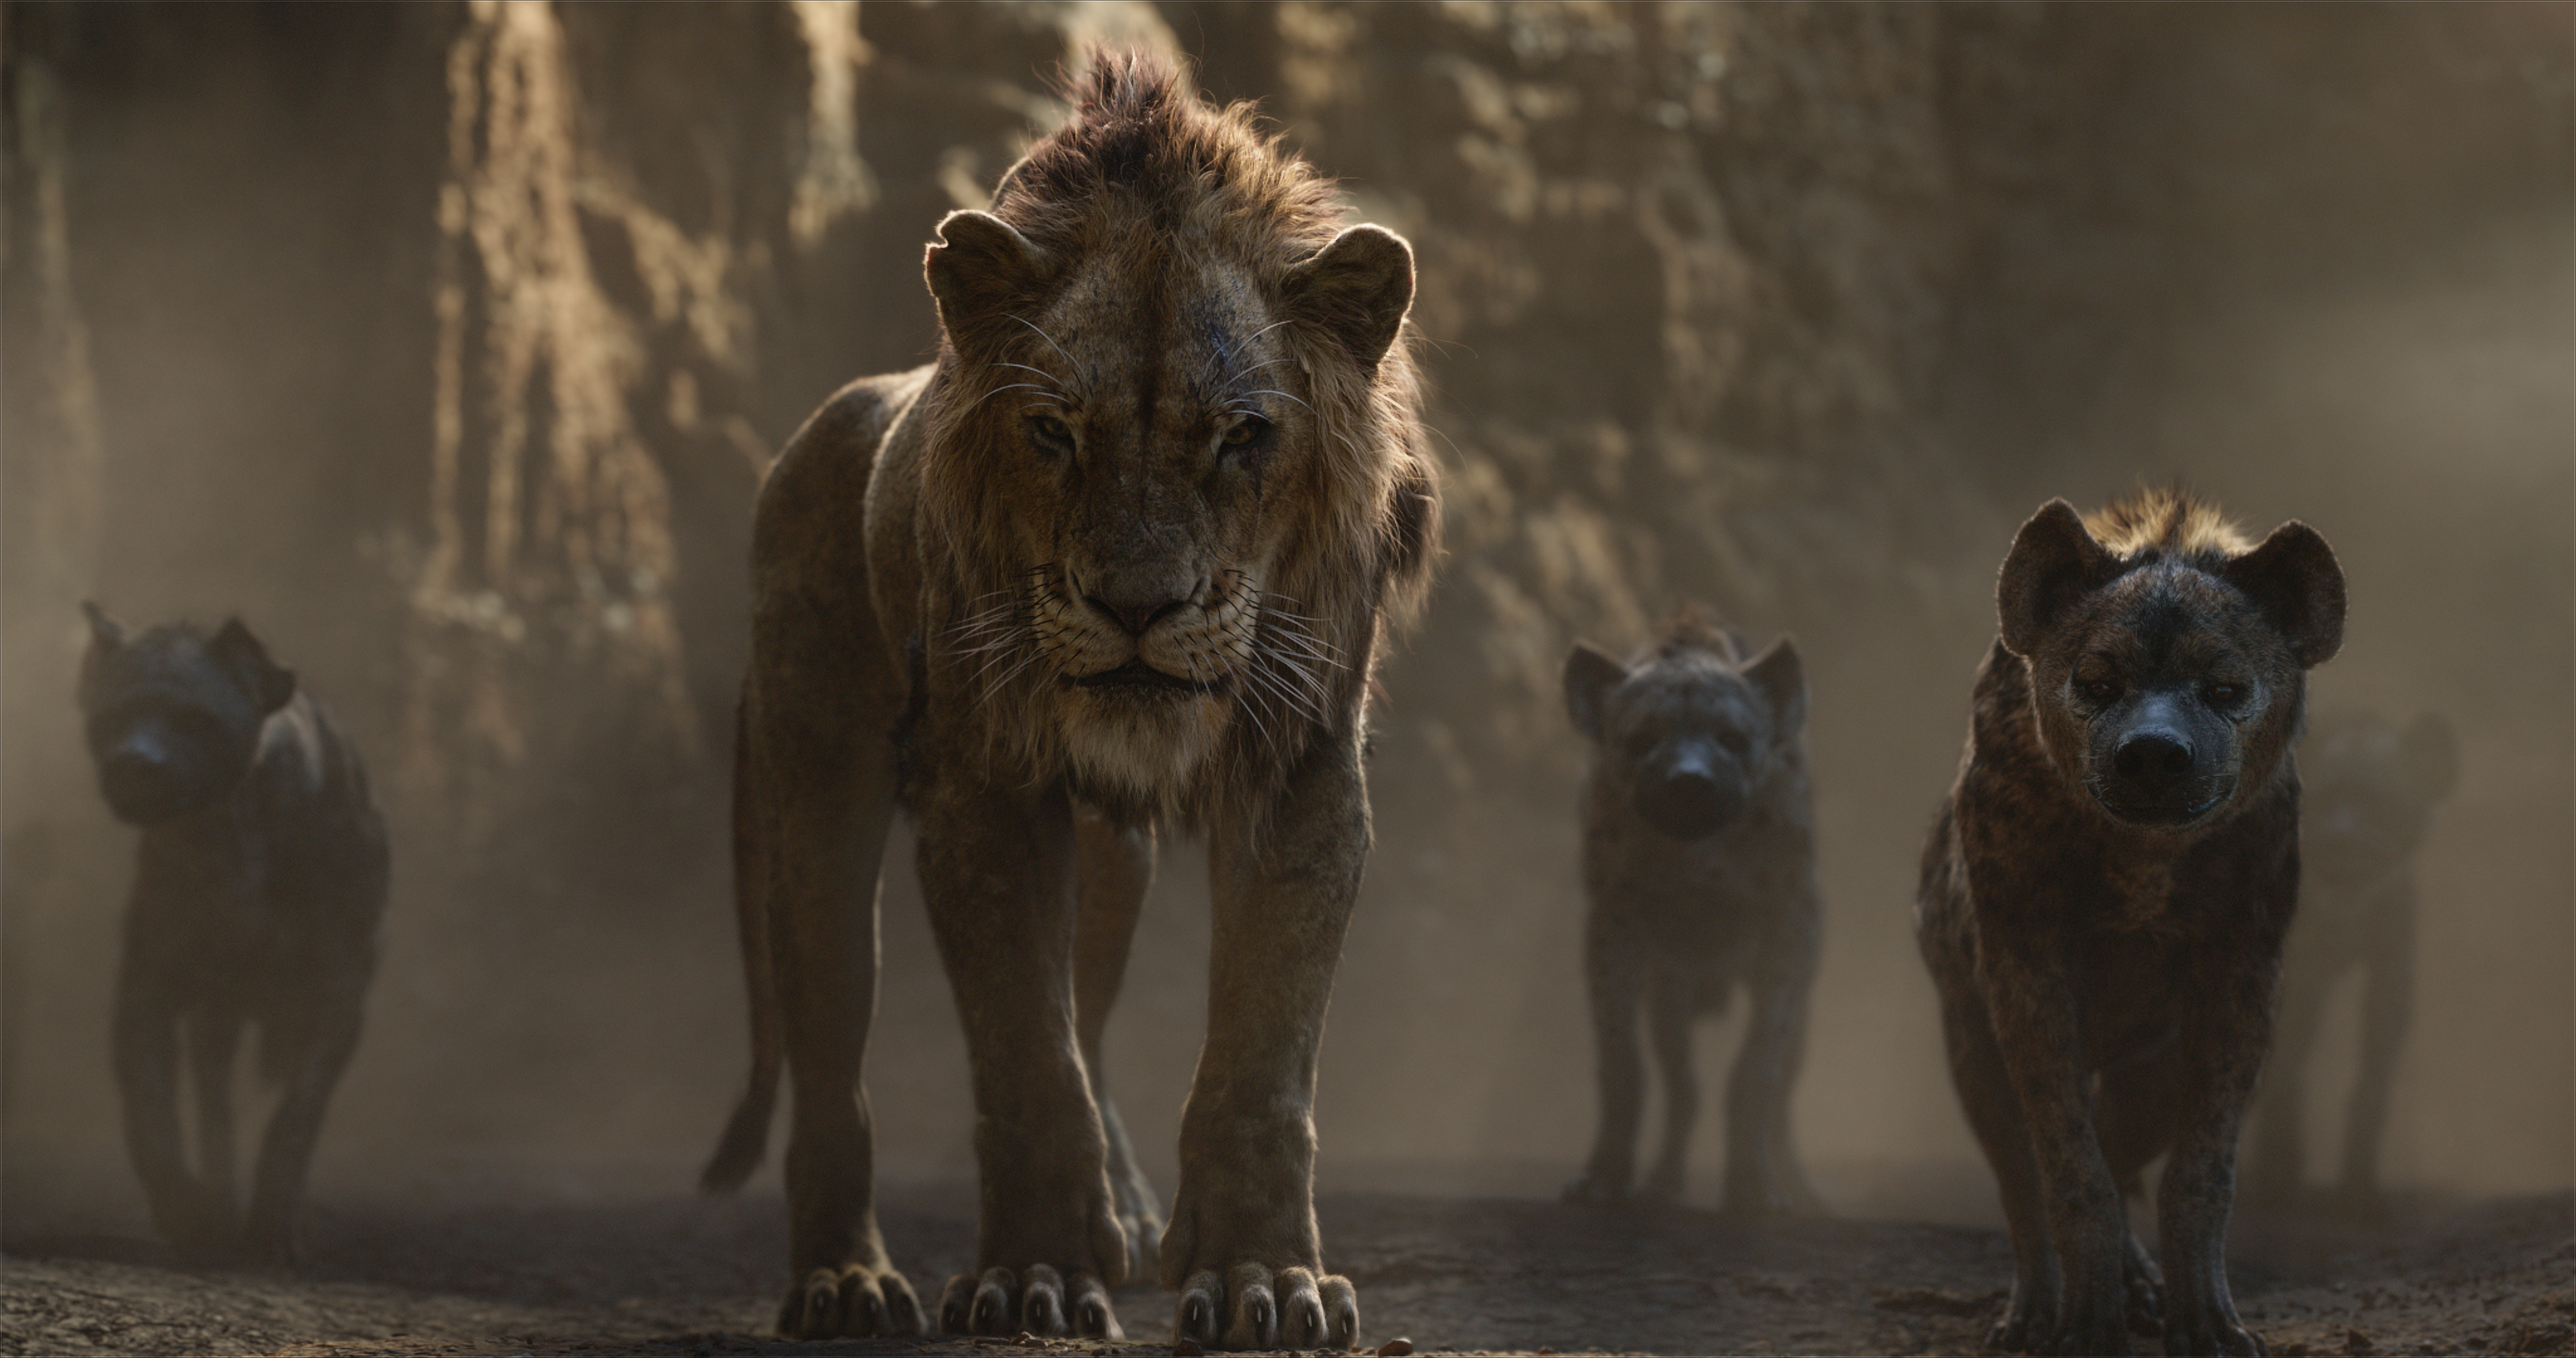 Featuring the voices of Florence Kasumba, Eric André and Keegan-Michael Key as the hyenas, and Chiwetel Ejiofor as Scar, Disney’s “The Lion King” is directed by Jon Favreau. (Disney—©2019 Disney Enterprises, Inc. All Rights Reserved.)